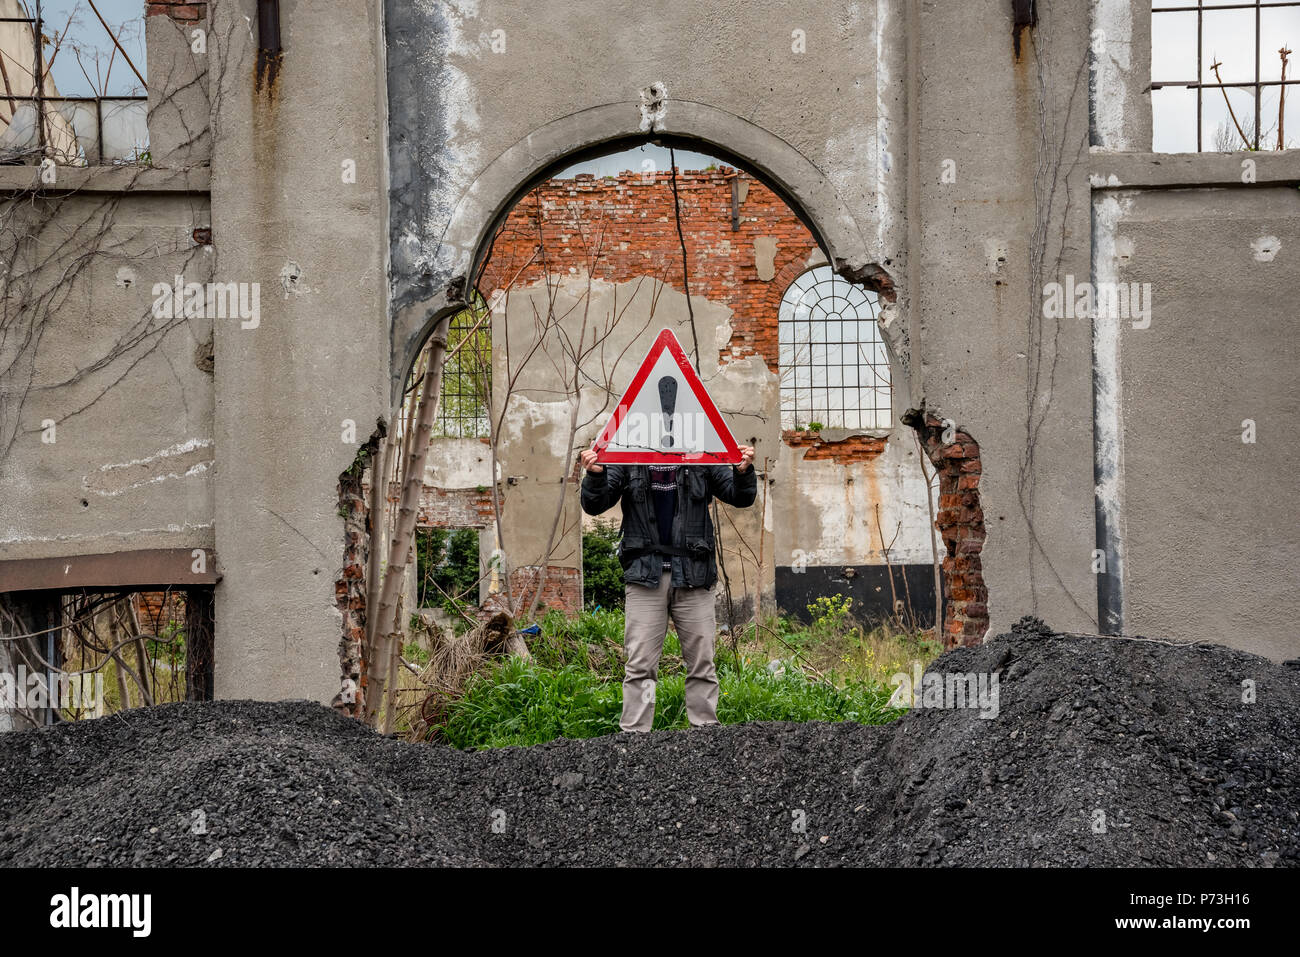 Unidentified man holds a red traffic triangle warning sign in front of his head near a ruined building. Stock Photo